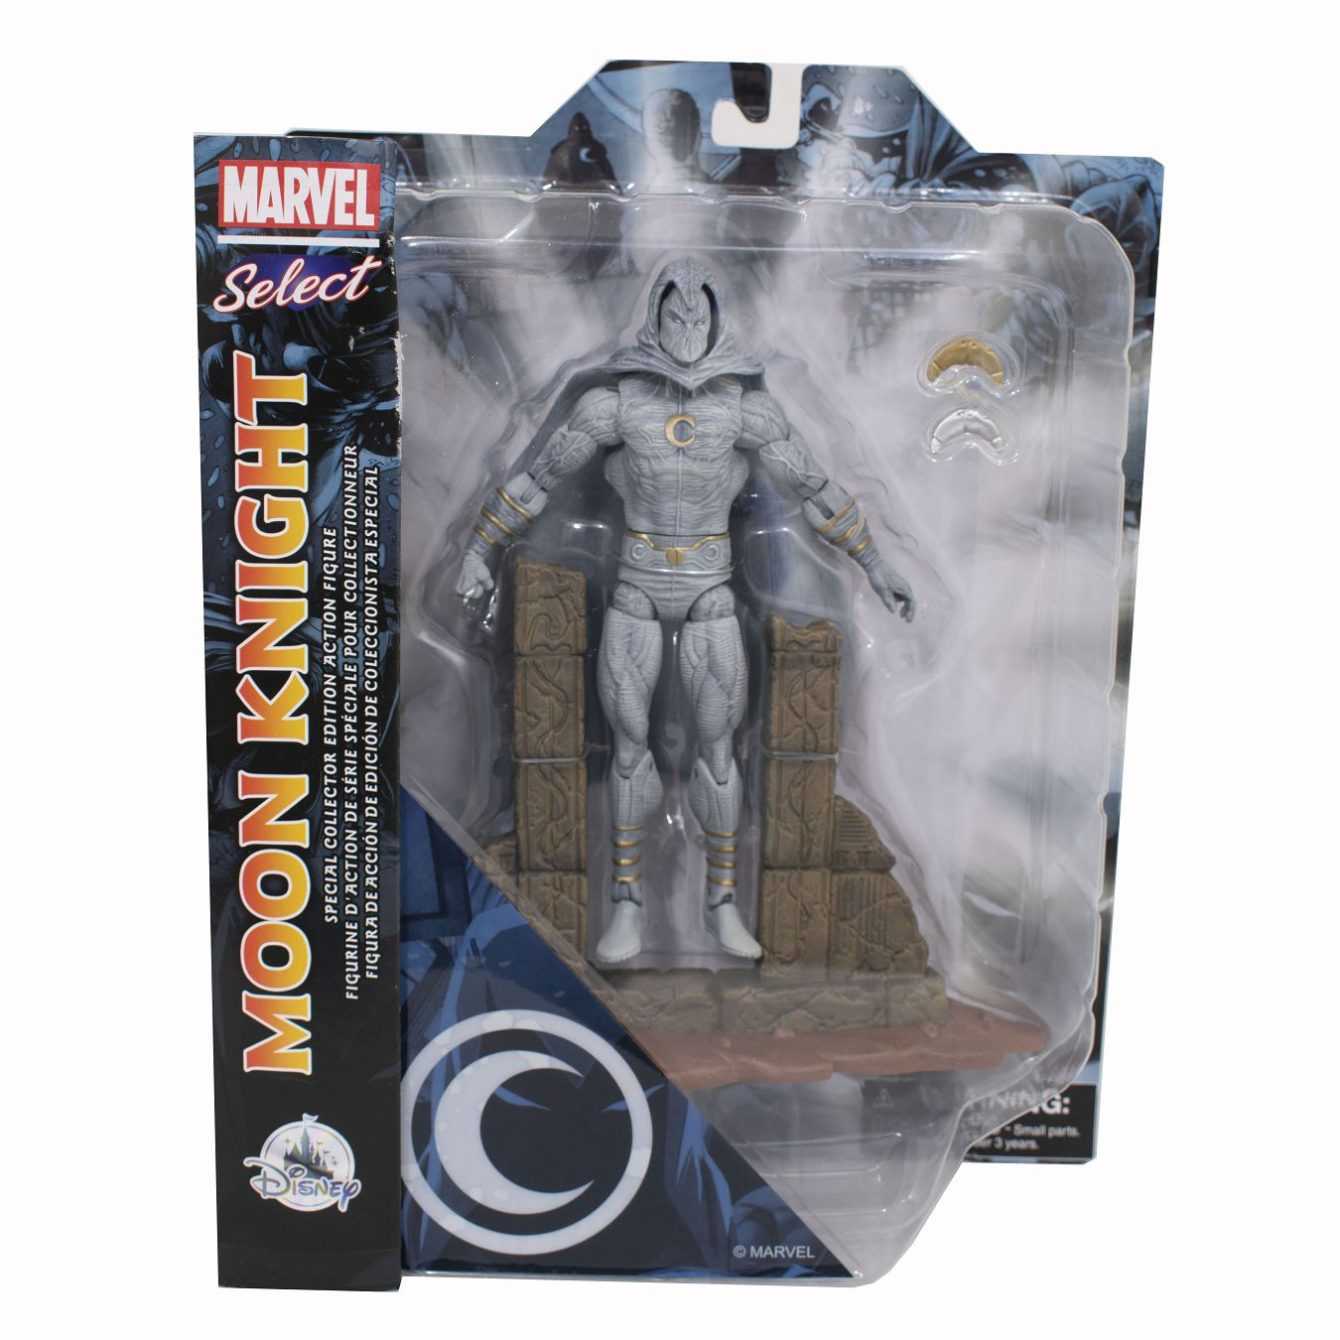 Moon Knight returns to the Disney Shop with the Marvel Select line